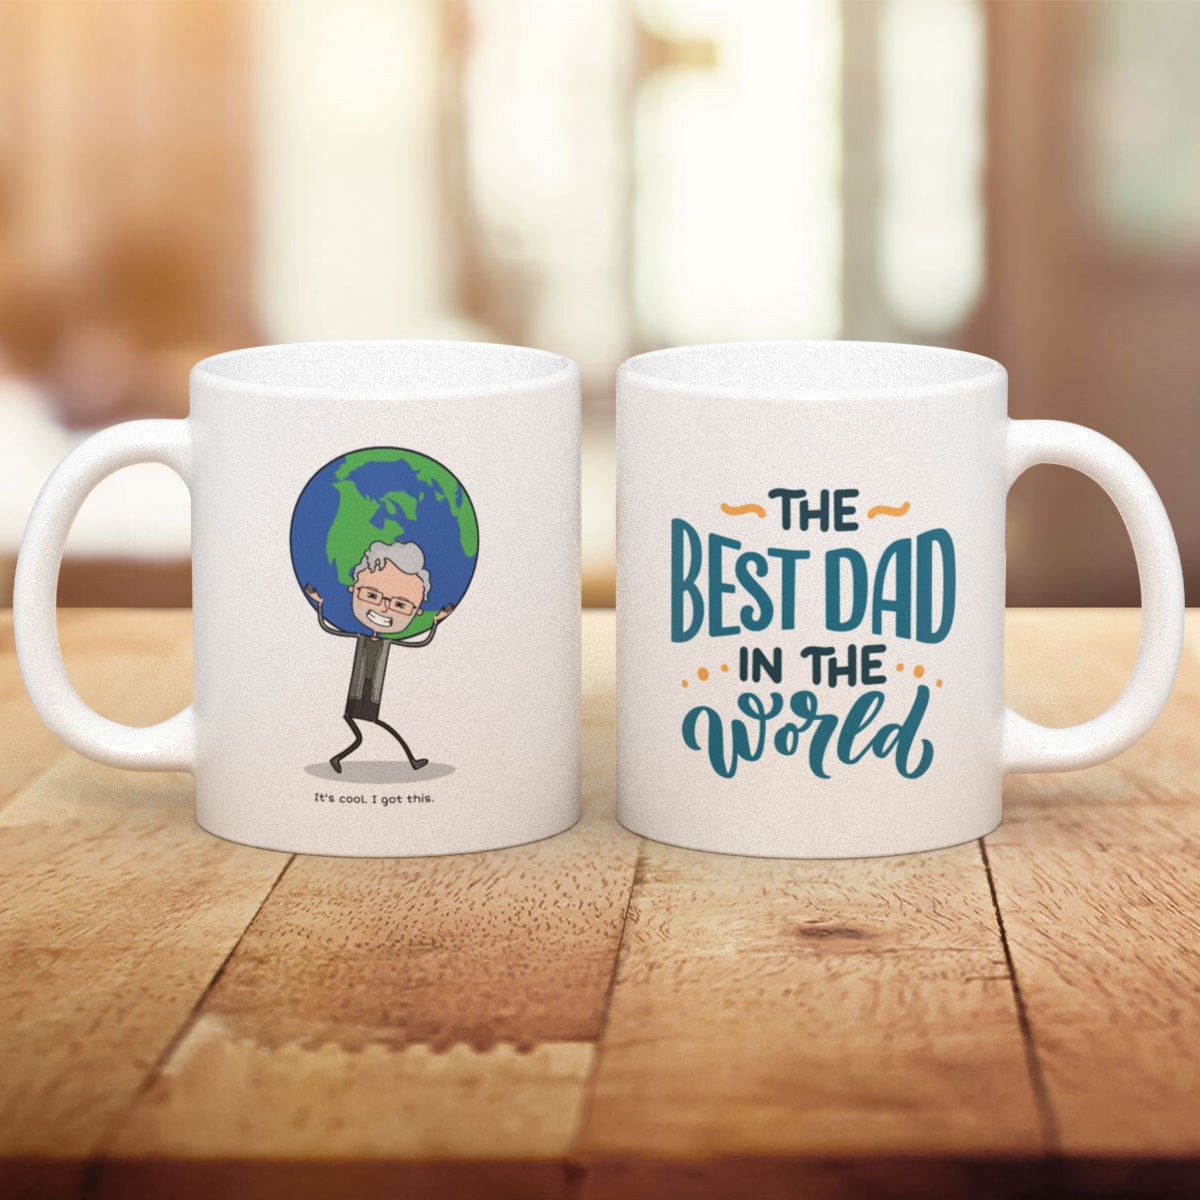 The Best Dad In The World - Single Mug